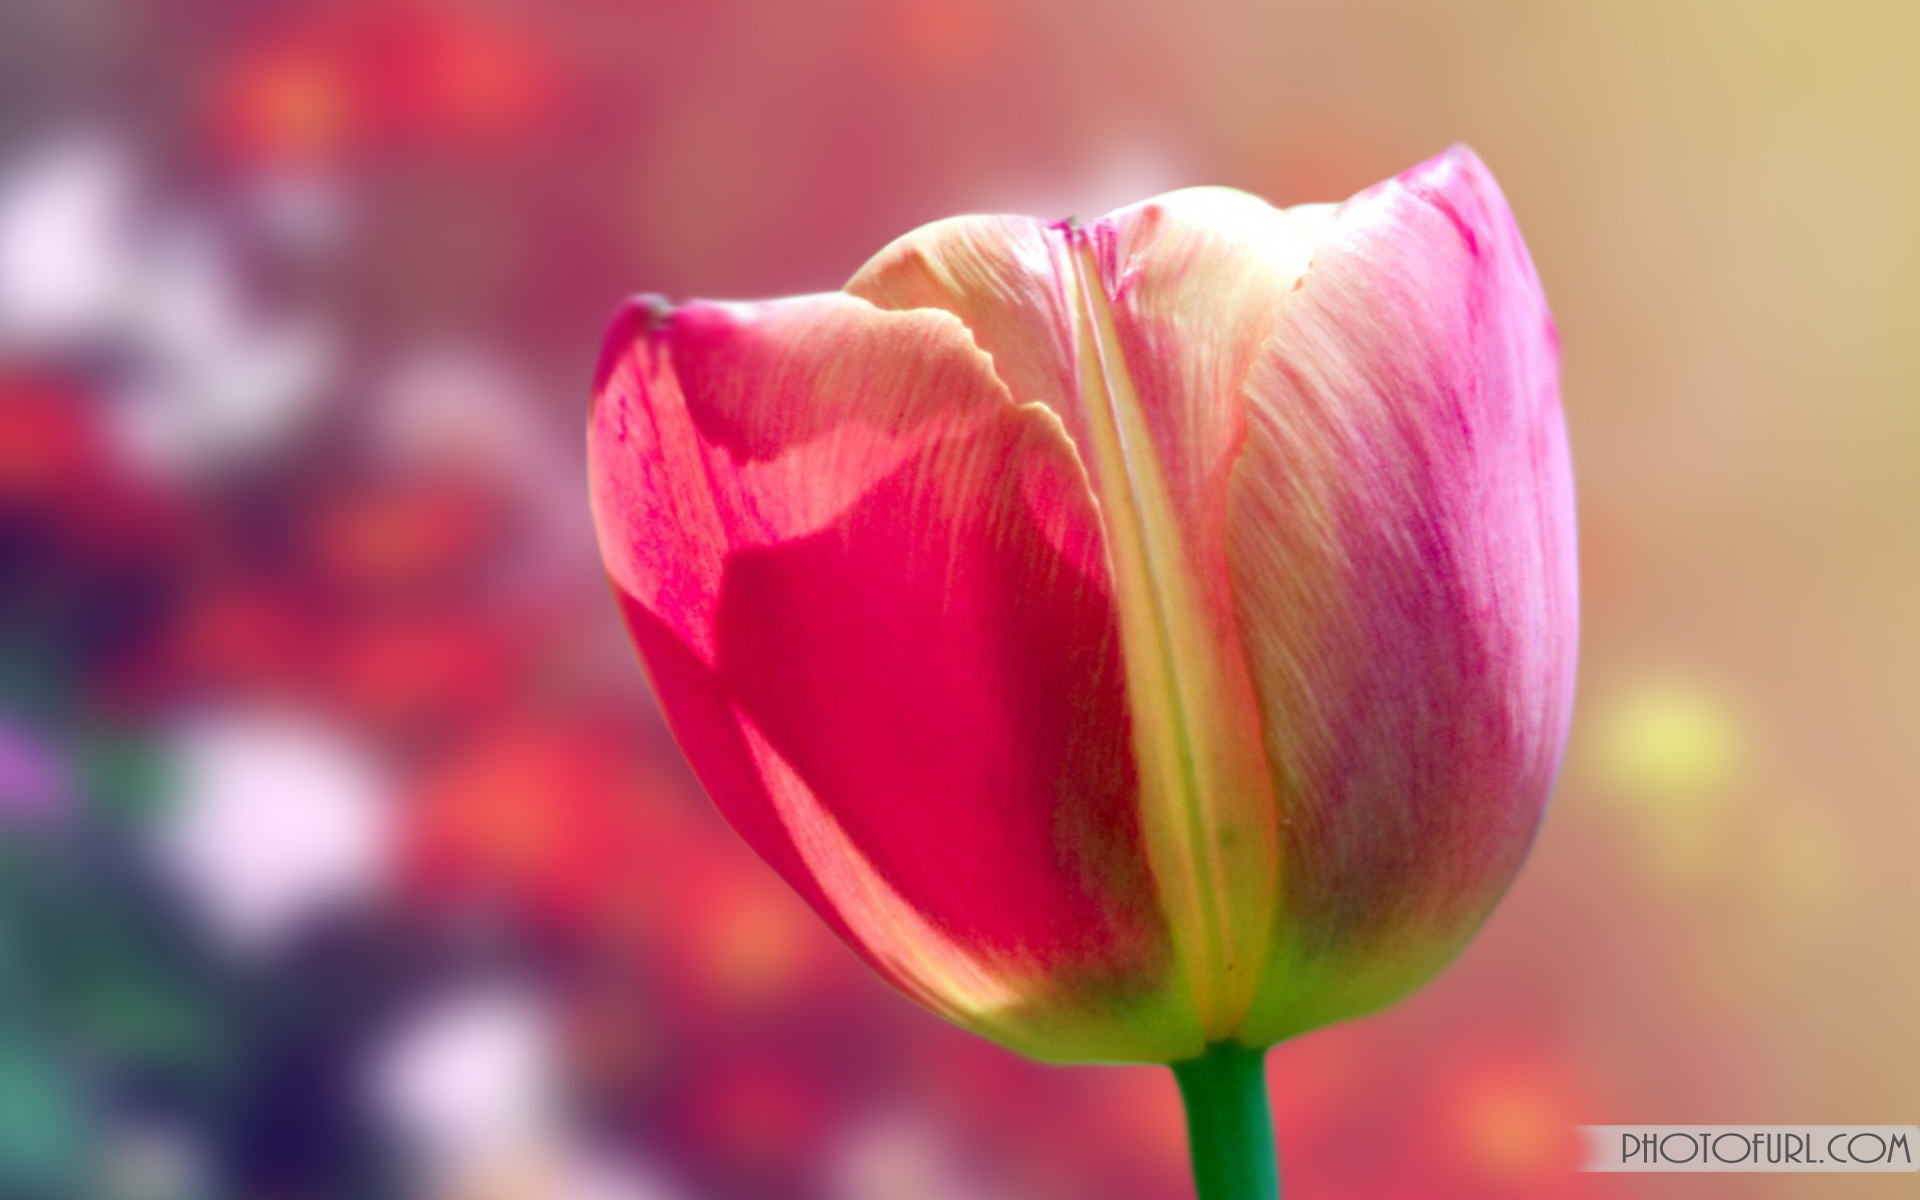 Gallery For Gt Colorful Flowers Background Wallpaper